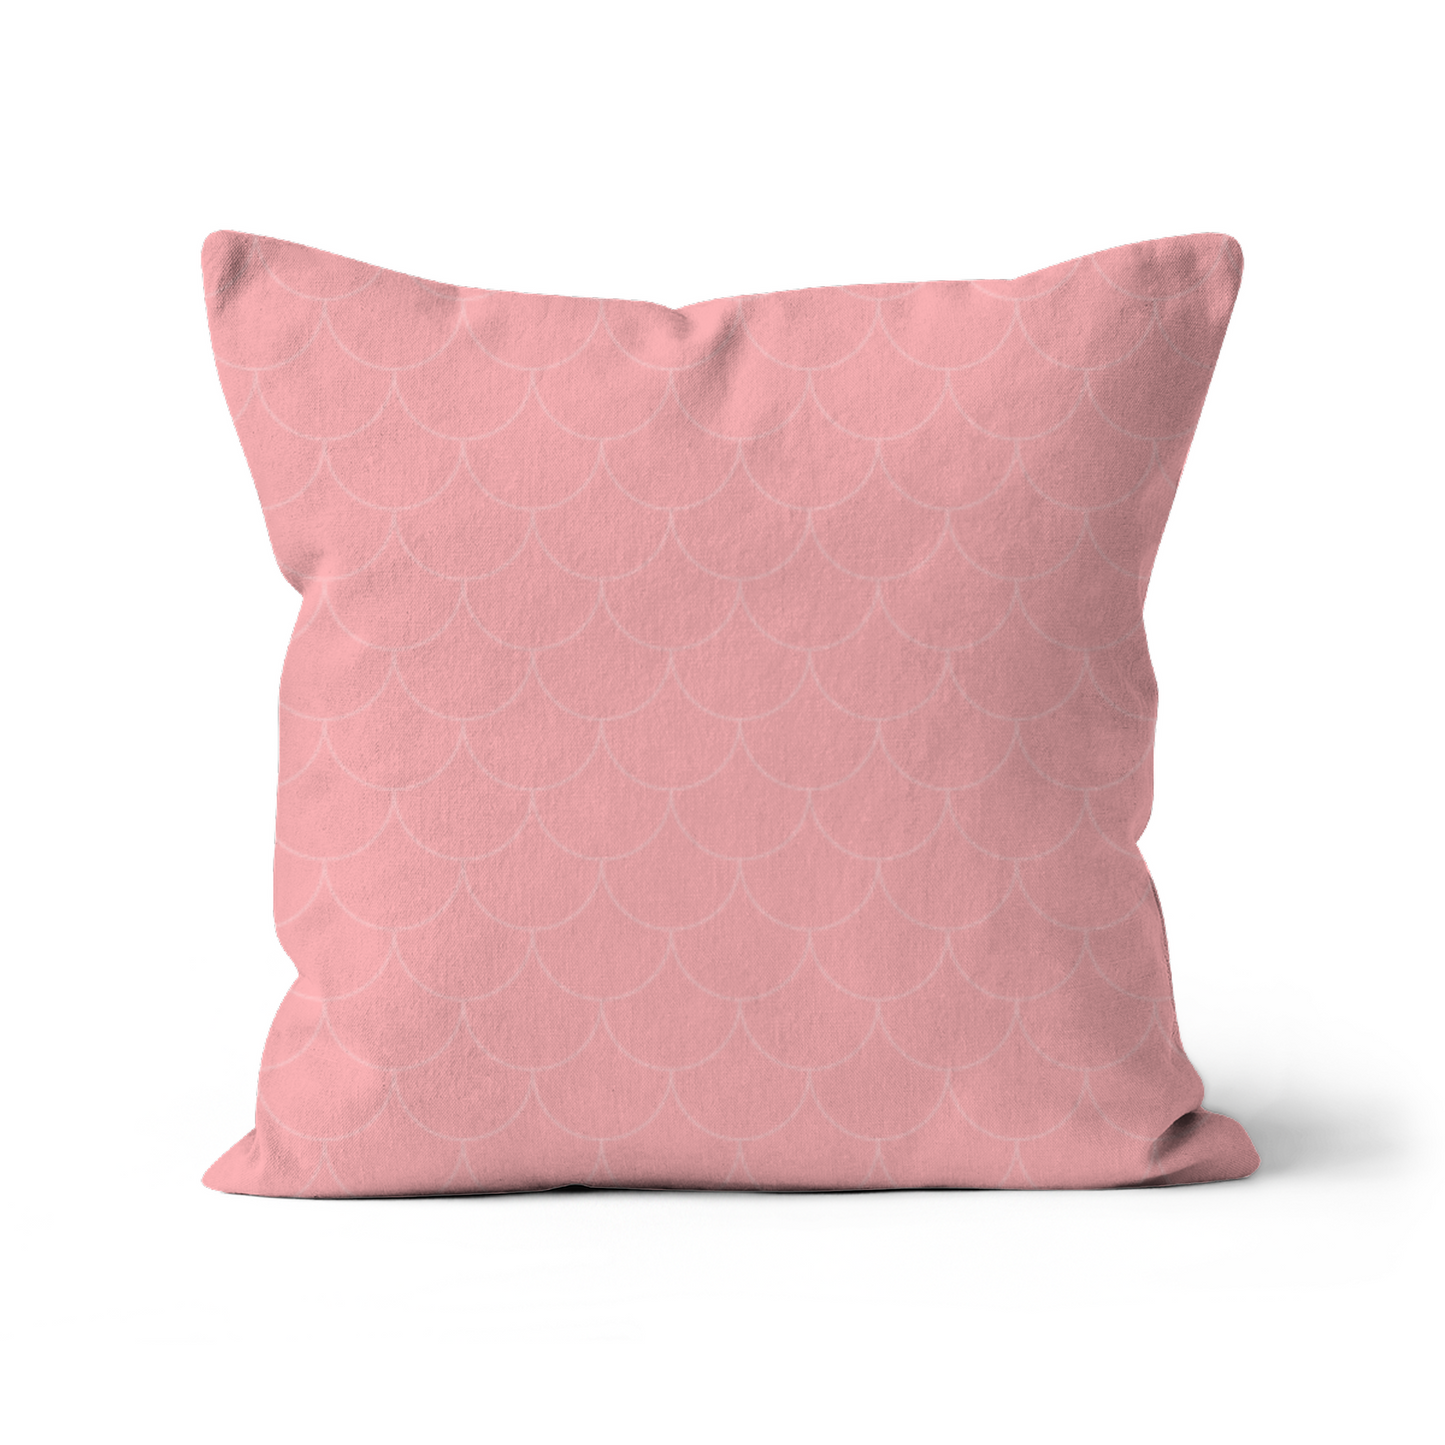 Plan It - Girl You Have What It Takes - Faux Suede Cushion